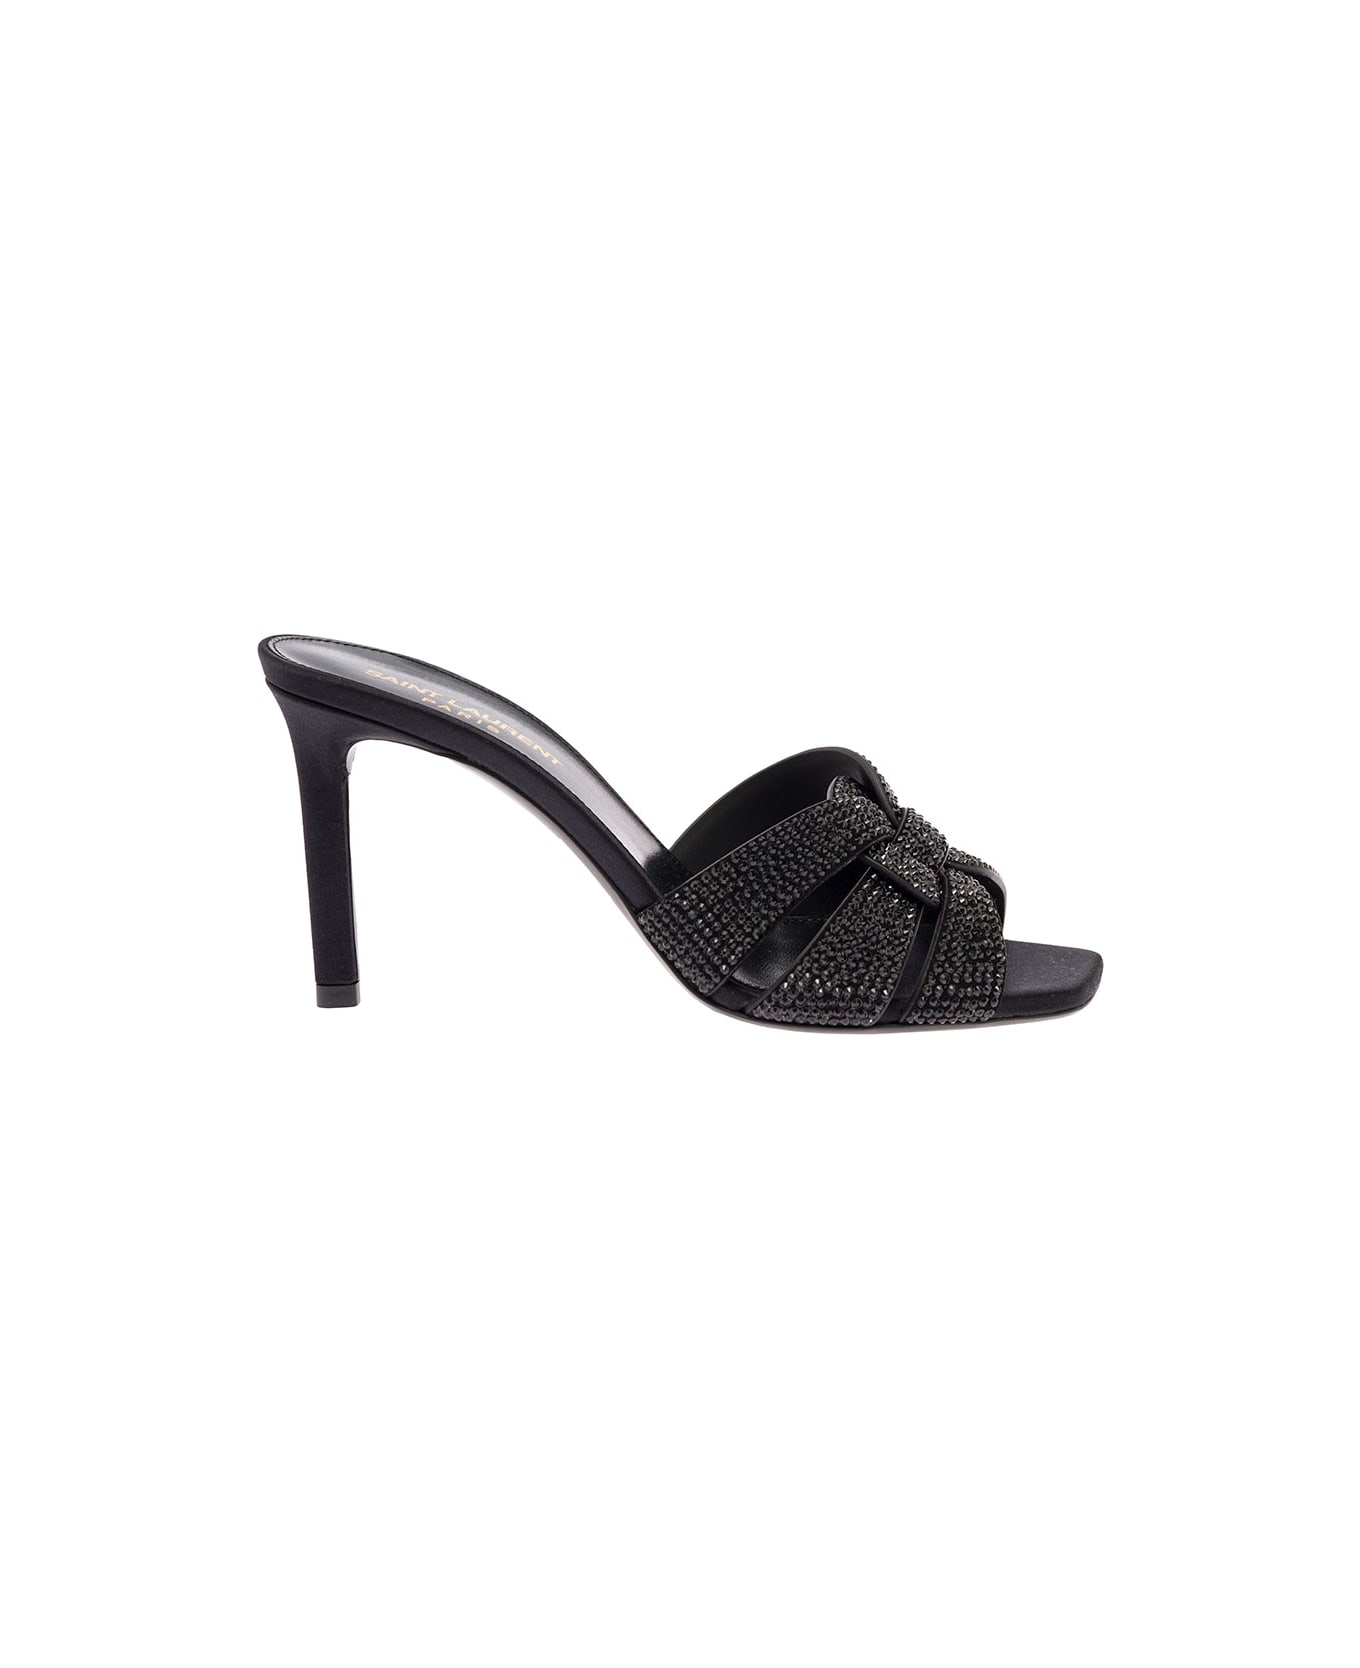 Saint Laurent Woman's Tribute Suede And Strass Mules - Black